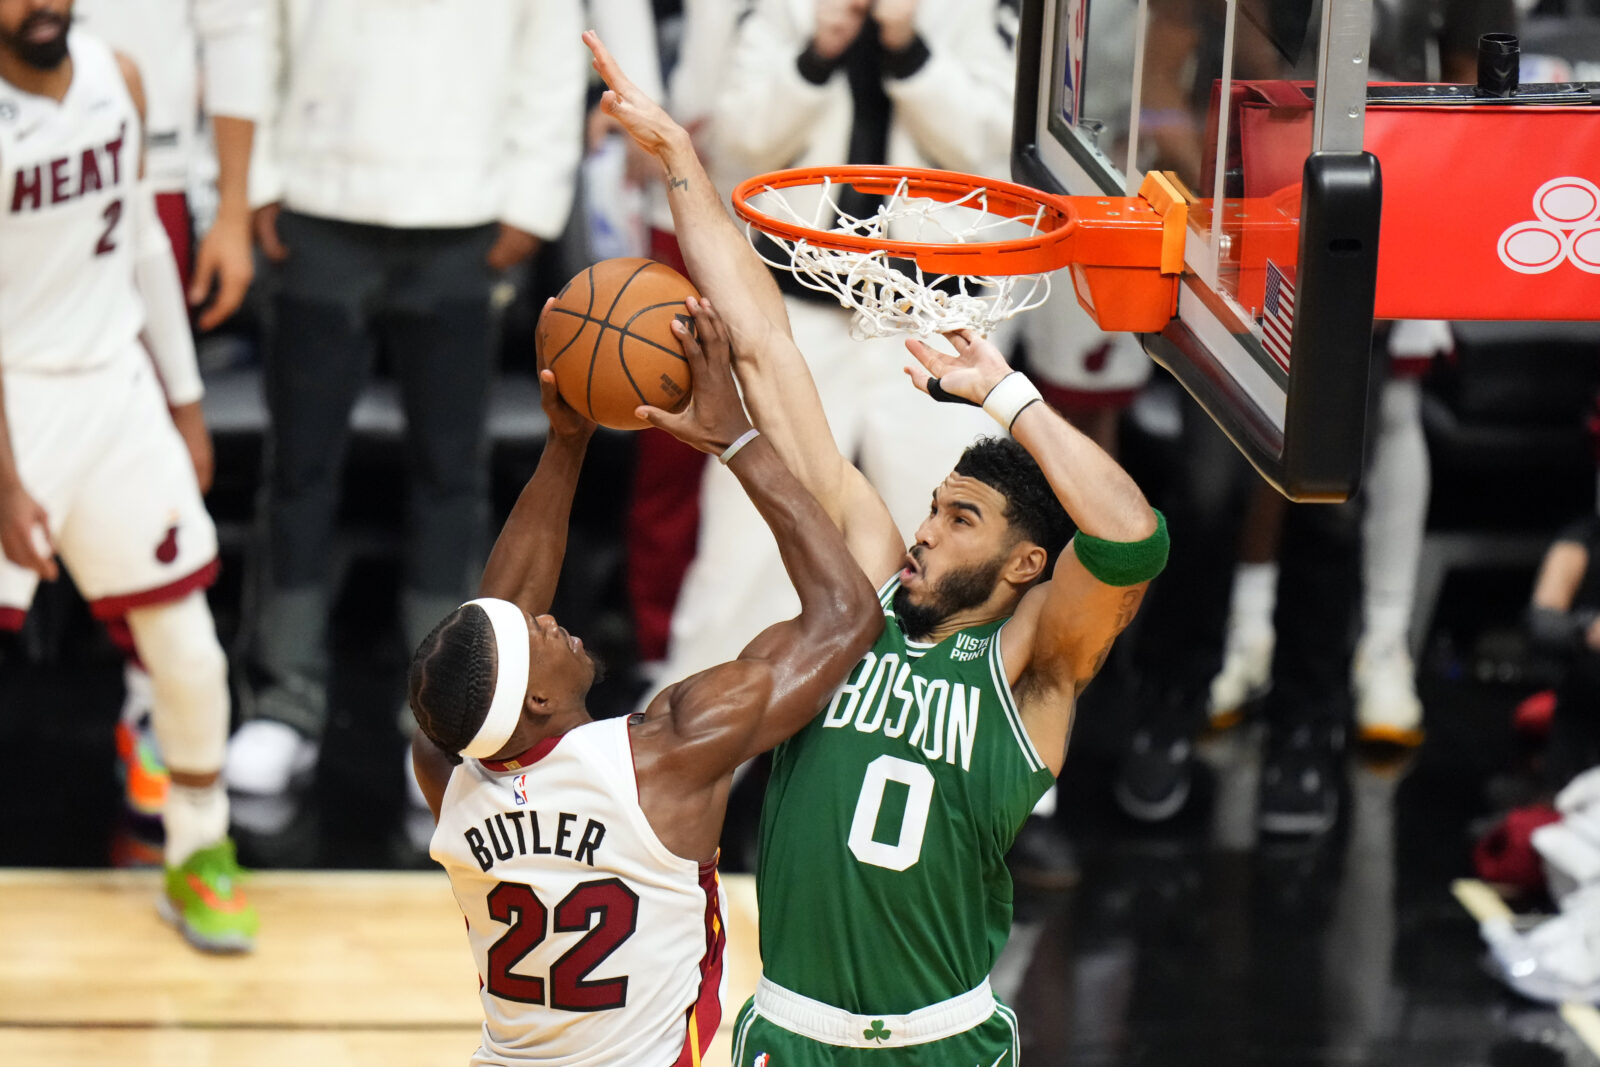 Boston Celtics get on the board against Miami Heat to keep series alive